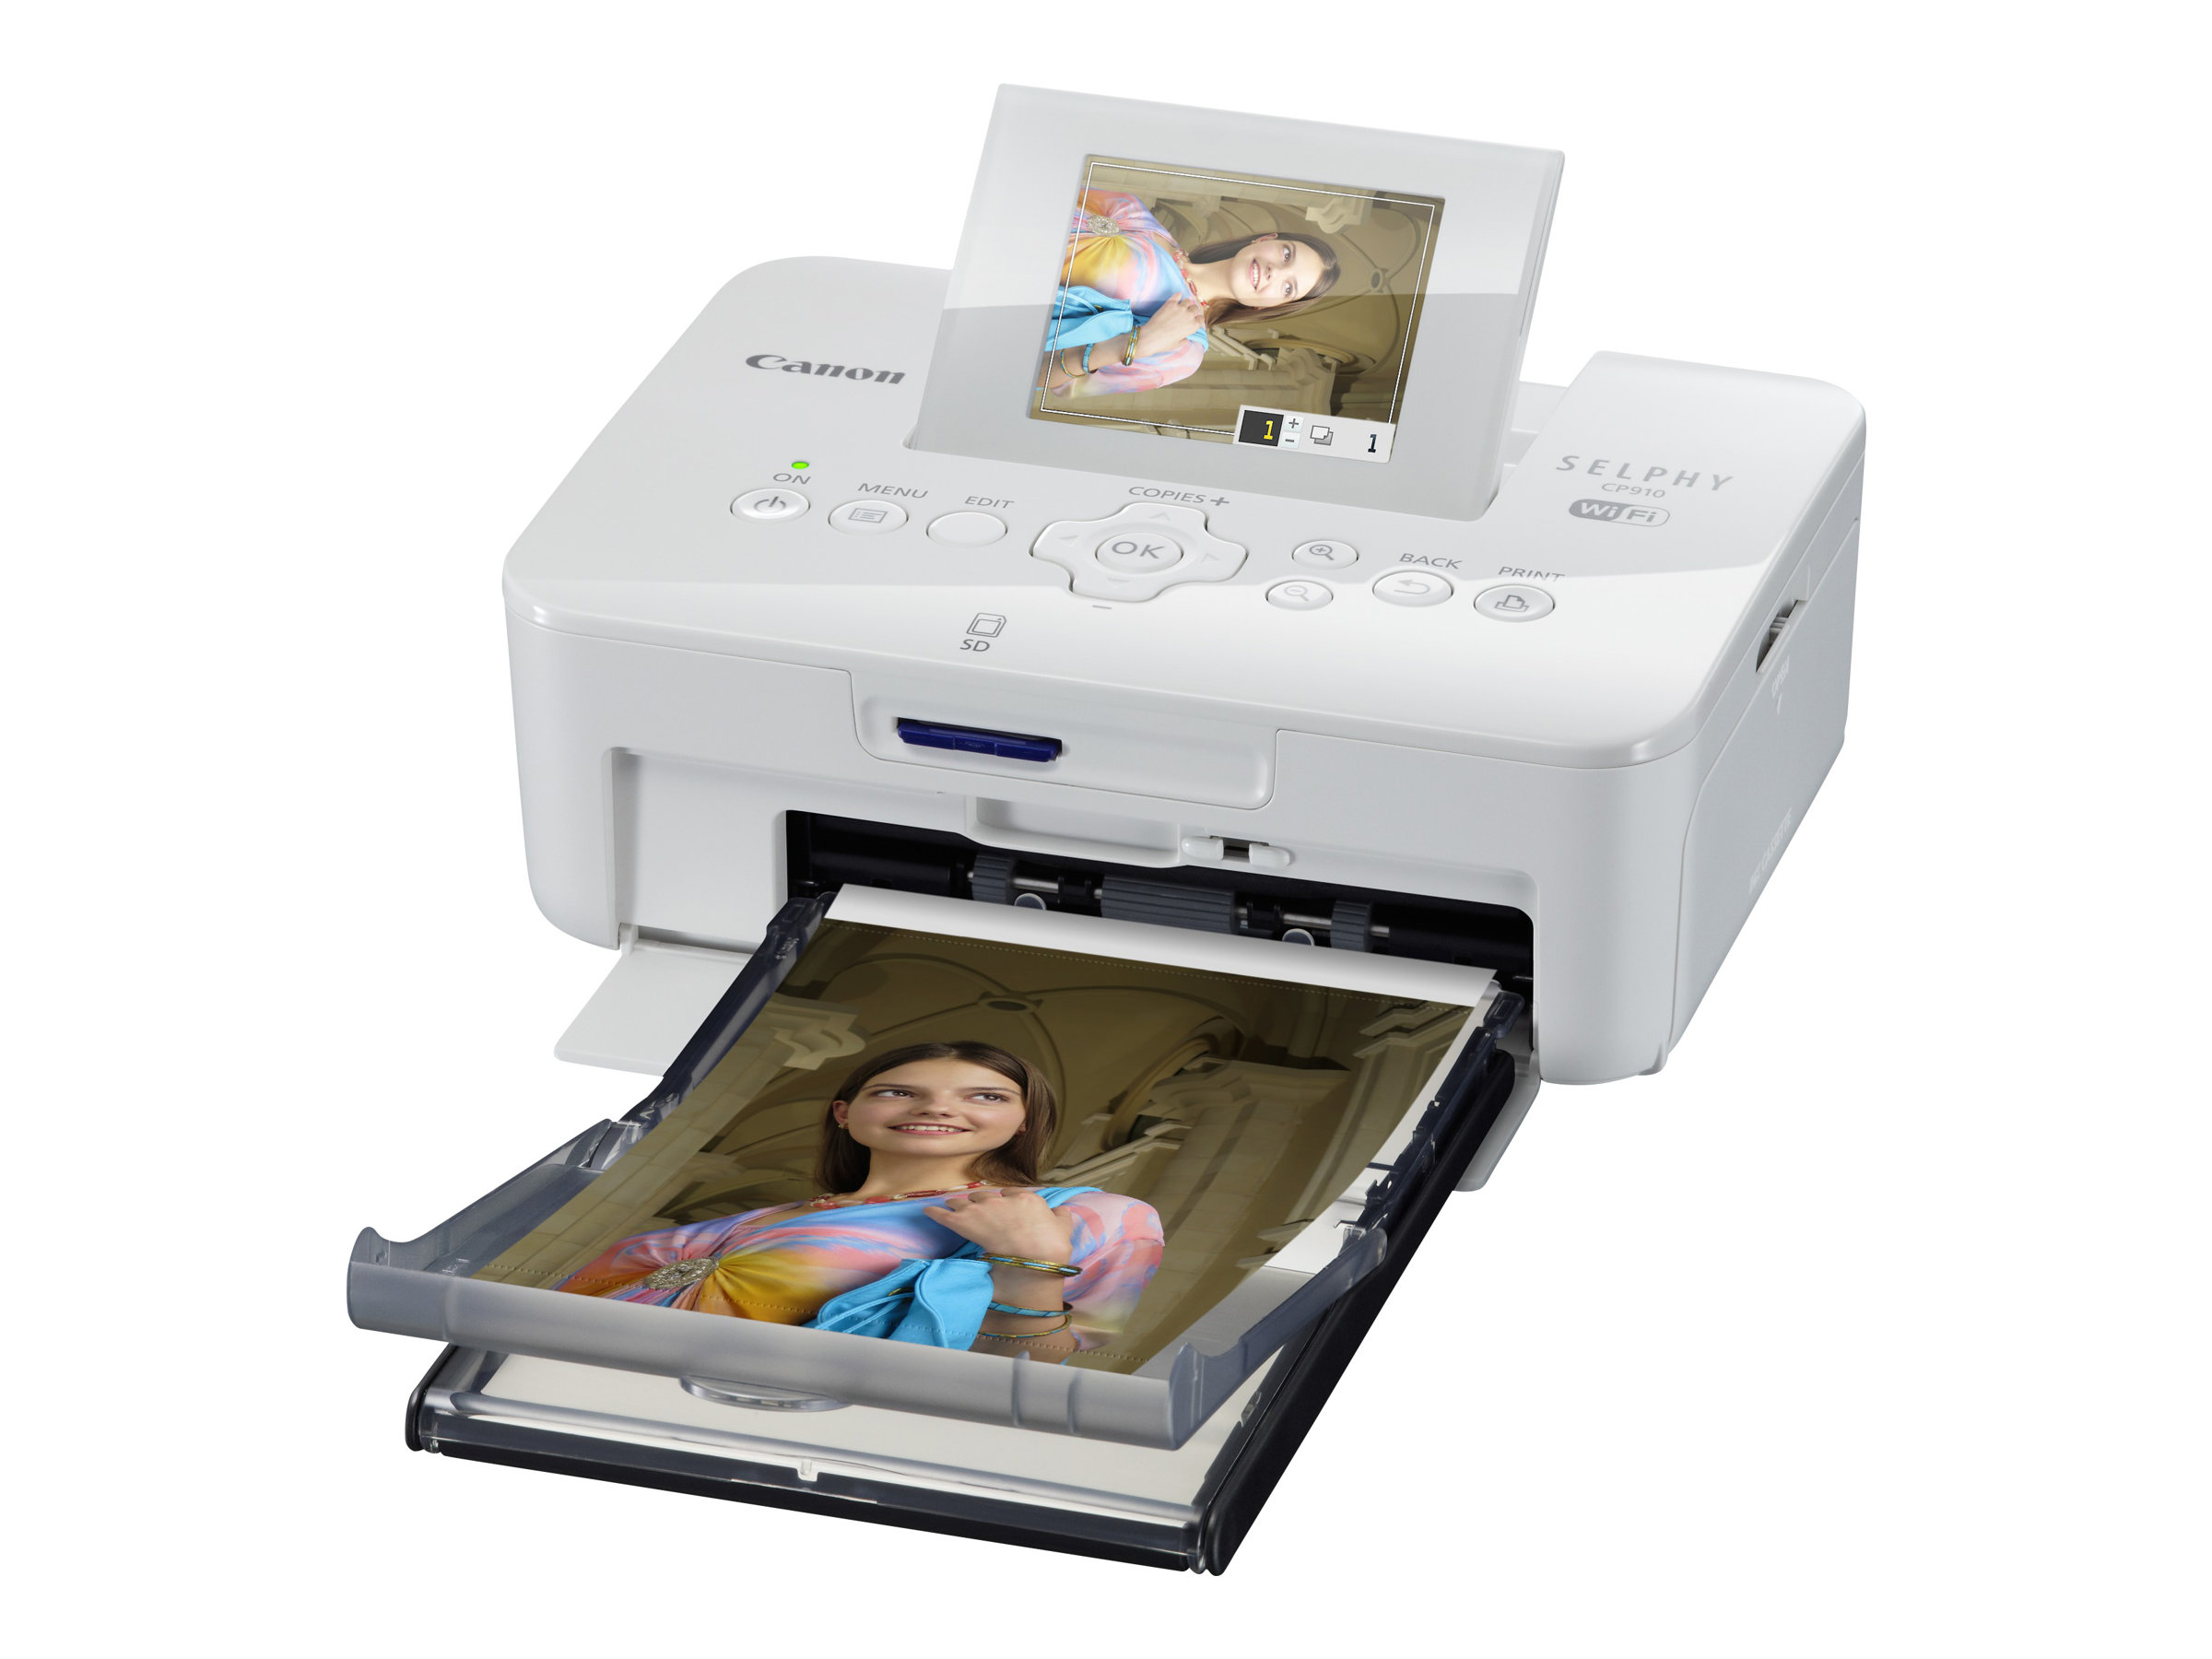 Canon SELPHY CP910 Dye Sublimation Printer, Color, Photo Print, Portable, 2.7" Display, White - image 1 of 2